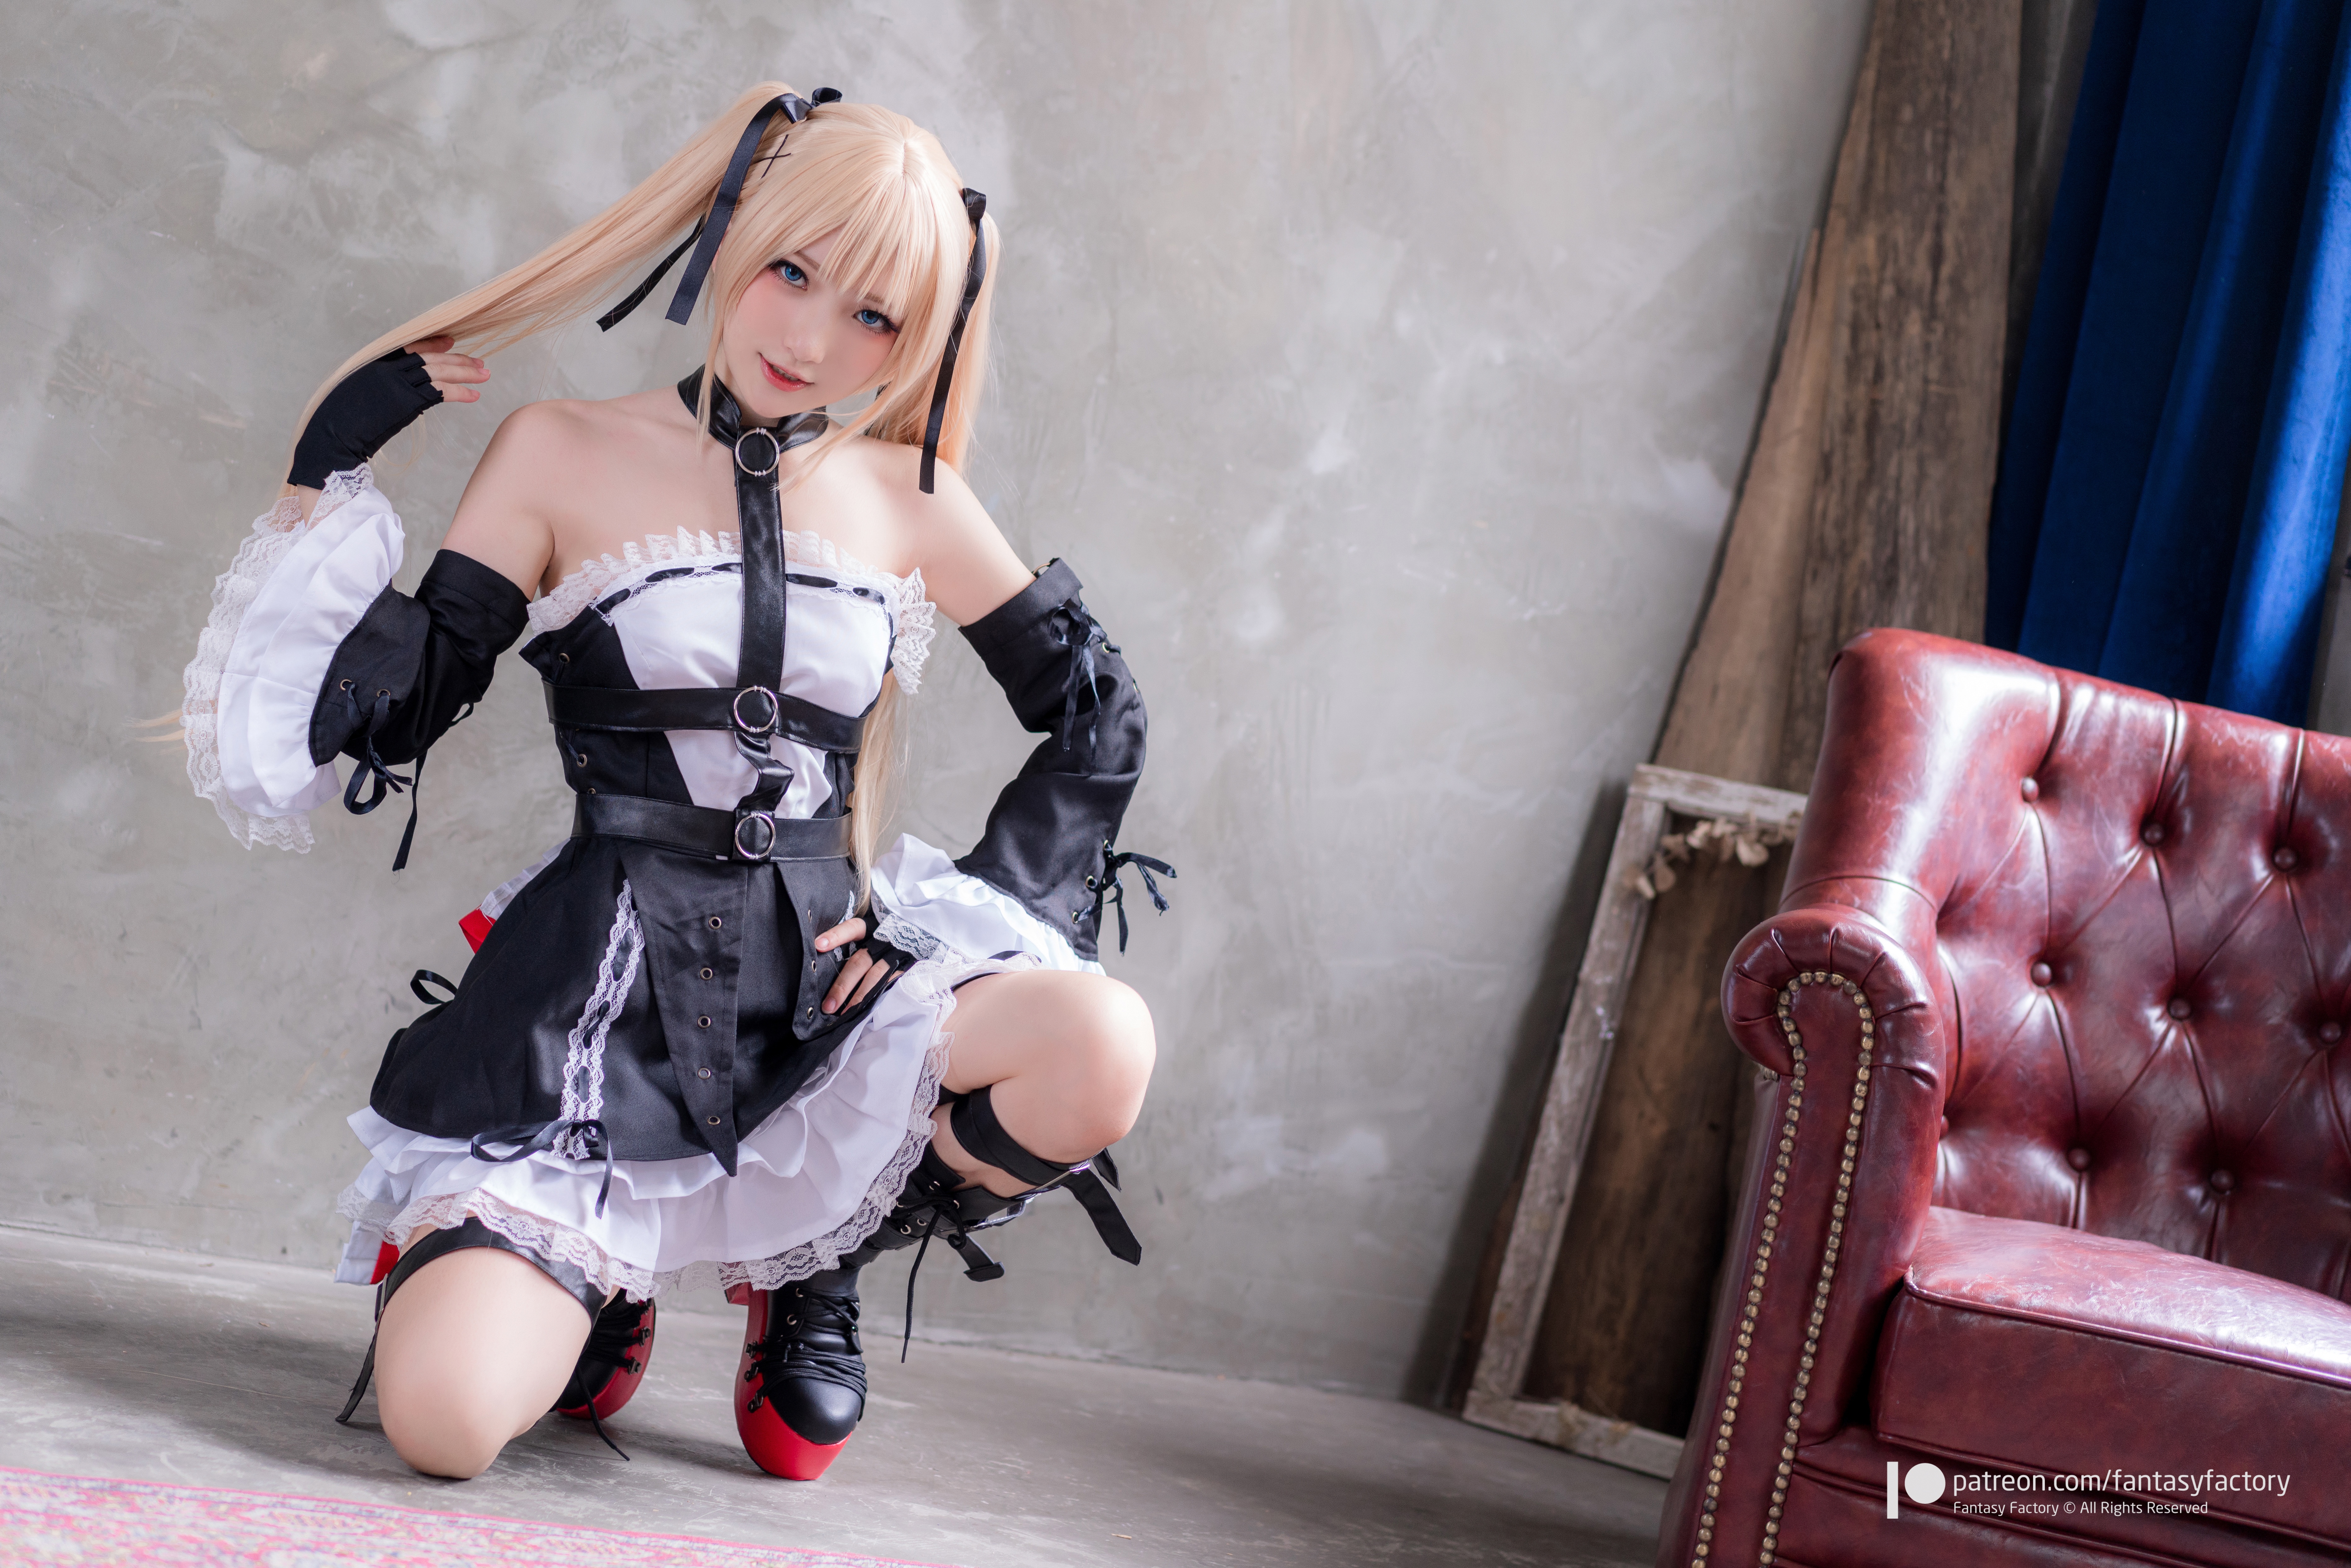 Women Model Asian Cosplay Marie Rose Dead Or Alive Video Games Video Game Girls Gothic Lolita Dress  7470x4983